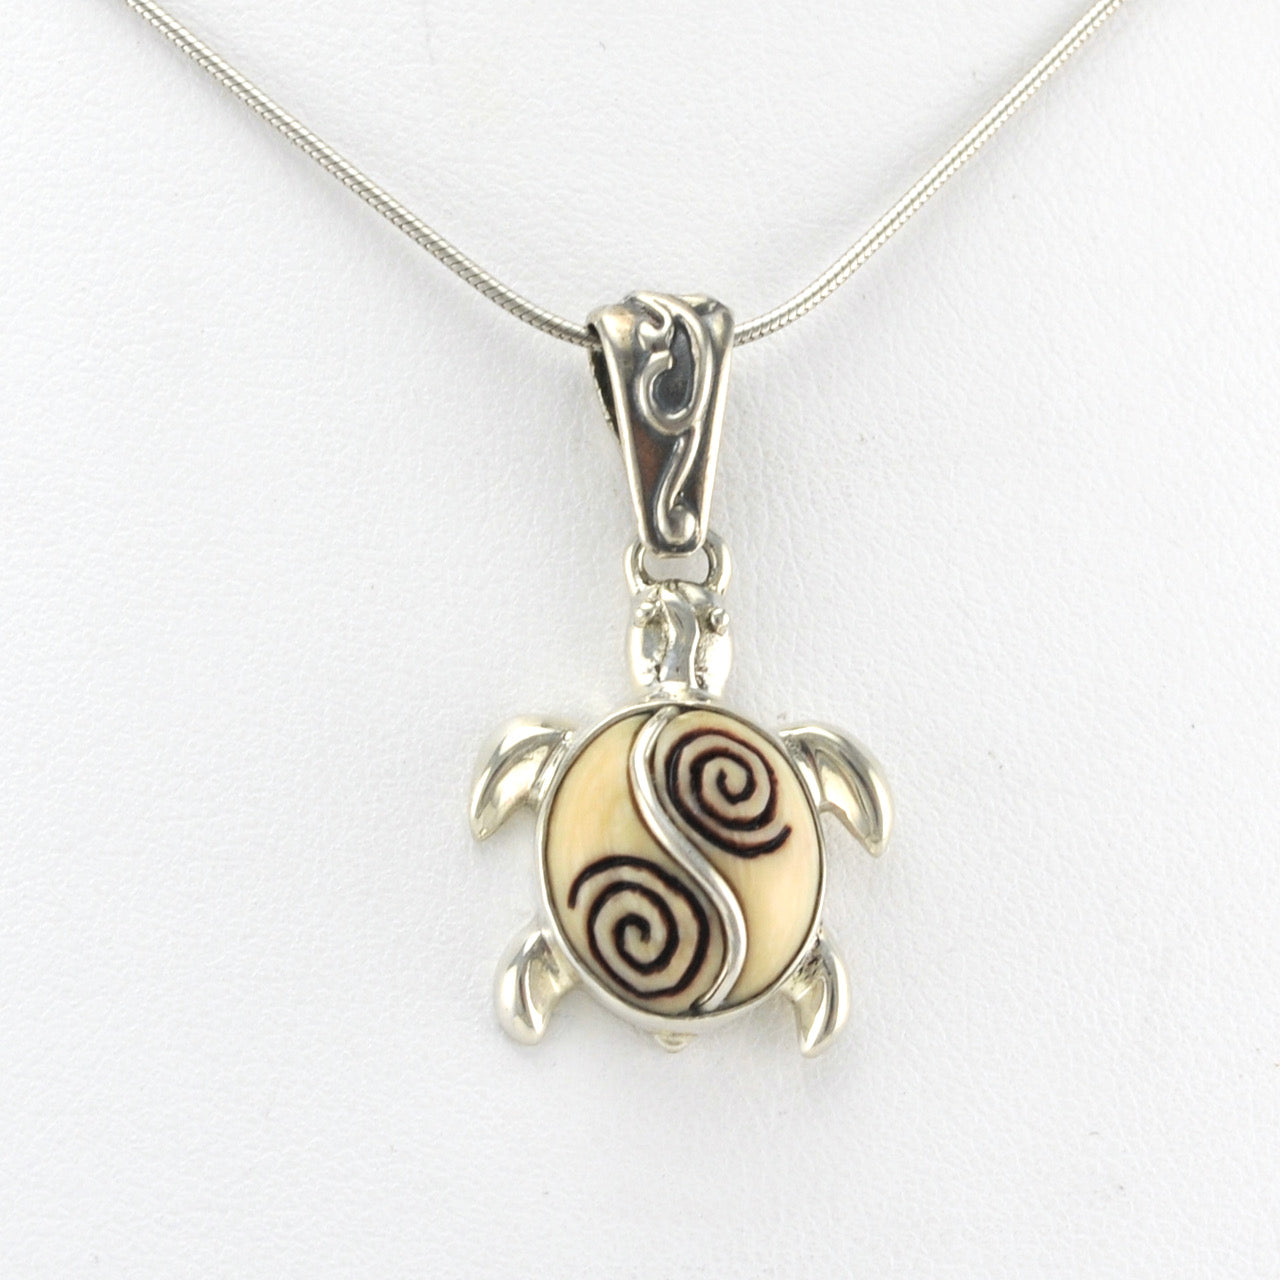 Fossilized Ivory with Sterling Silver Sea Turtle Necklace